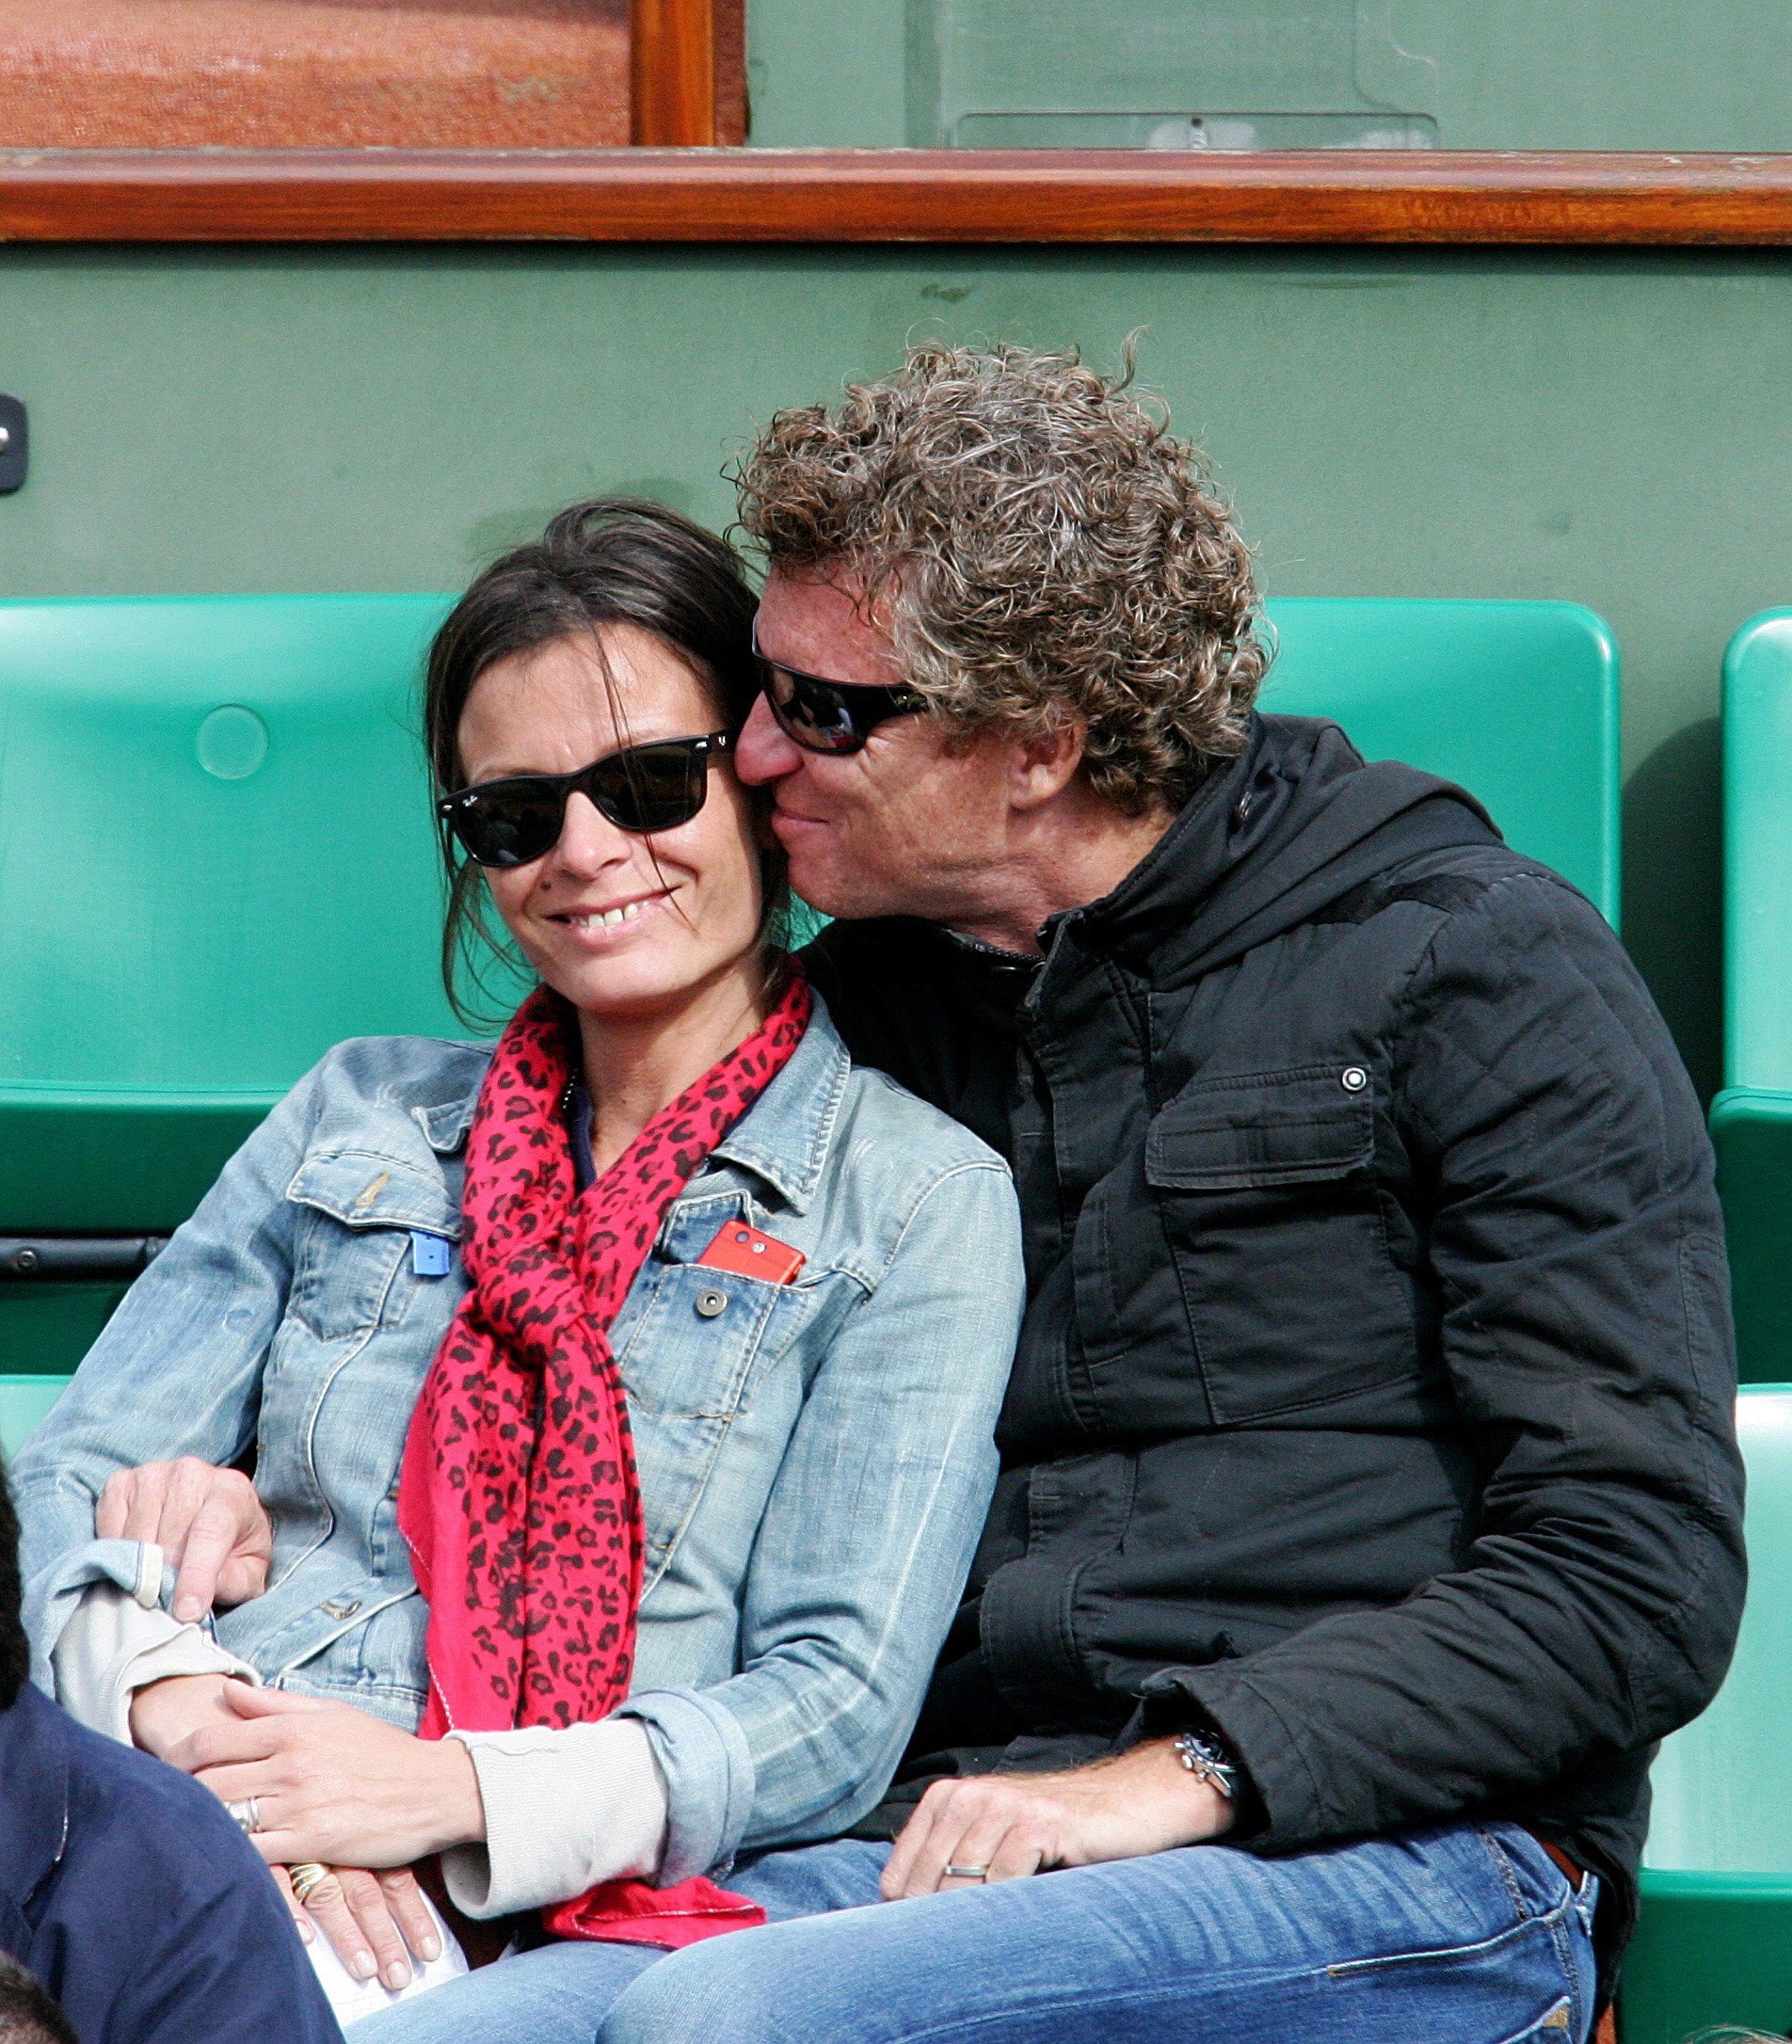 Celebrities at the 2009 Roland Garros Tournament in Paris, France, May 26, 2009 - Denis Brogniat and his wife Hortense.  |  Source: Getty Images